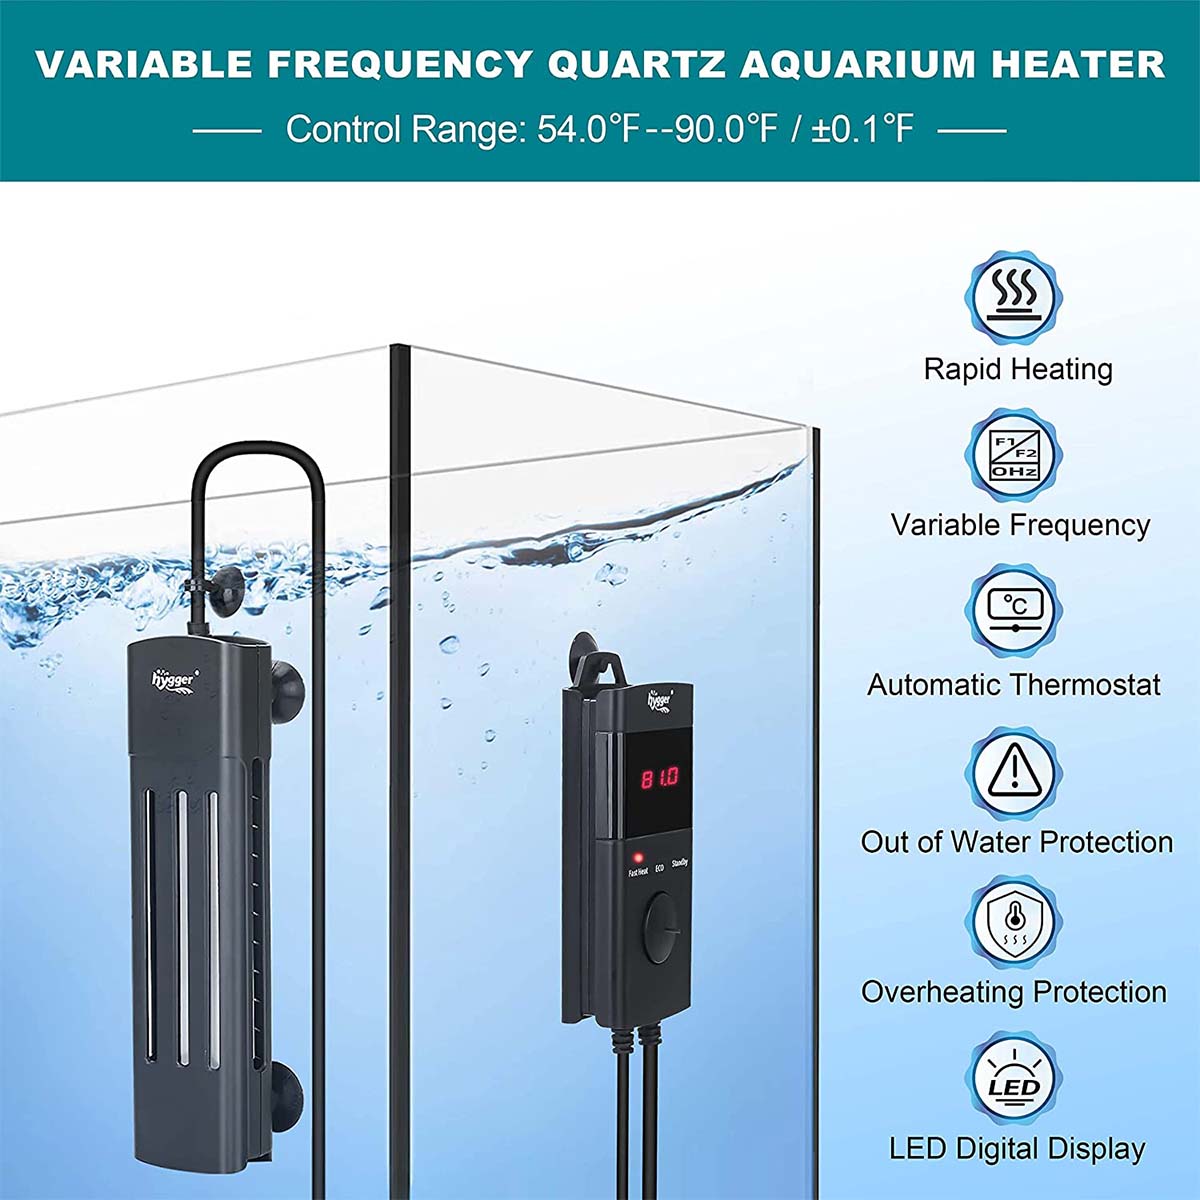 hygger Variable Frequency Aquarium Water Heater - hygger